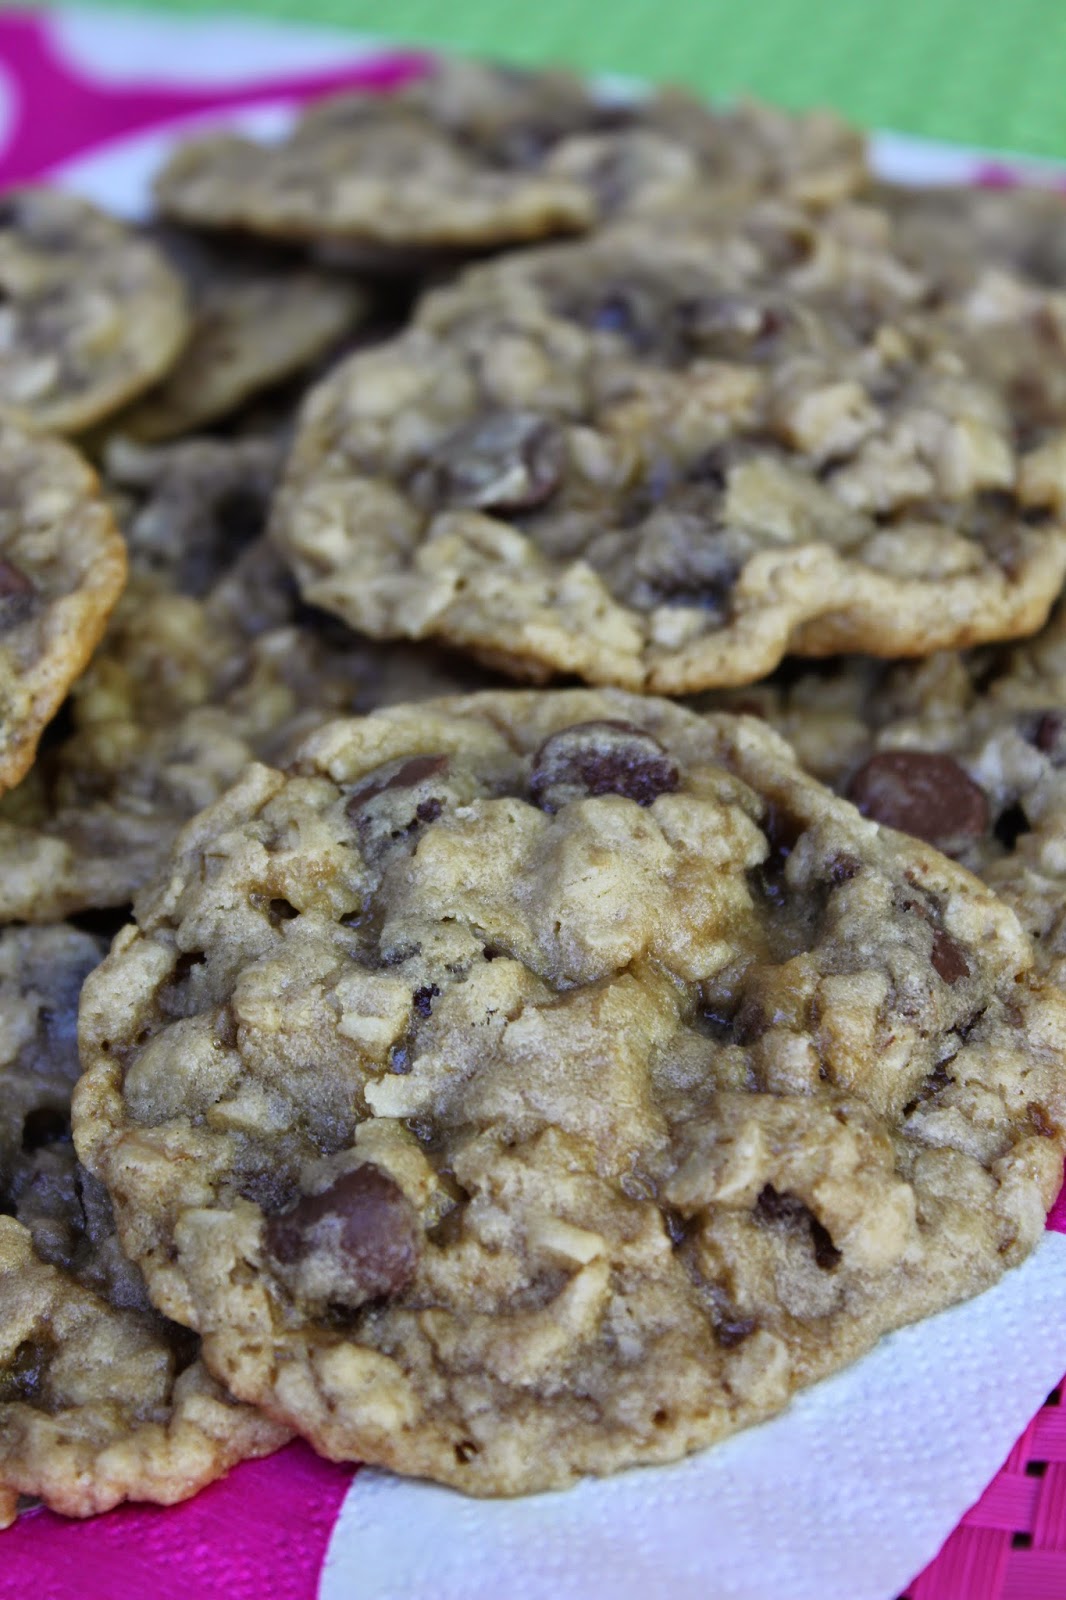 Recipe: Cookie, Recipe: Chocolate, healthier cookie recipe, favorite chocolate chip cookie, Recipe: Dessert, Deals to Meals, Recipe: Oats, Recipe: Grains, Chewy Coconut Chocolate Chip Cookies